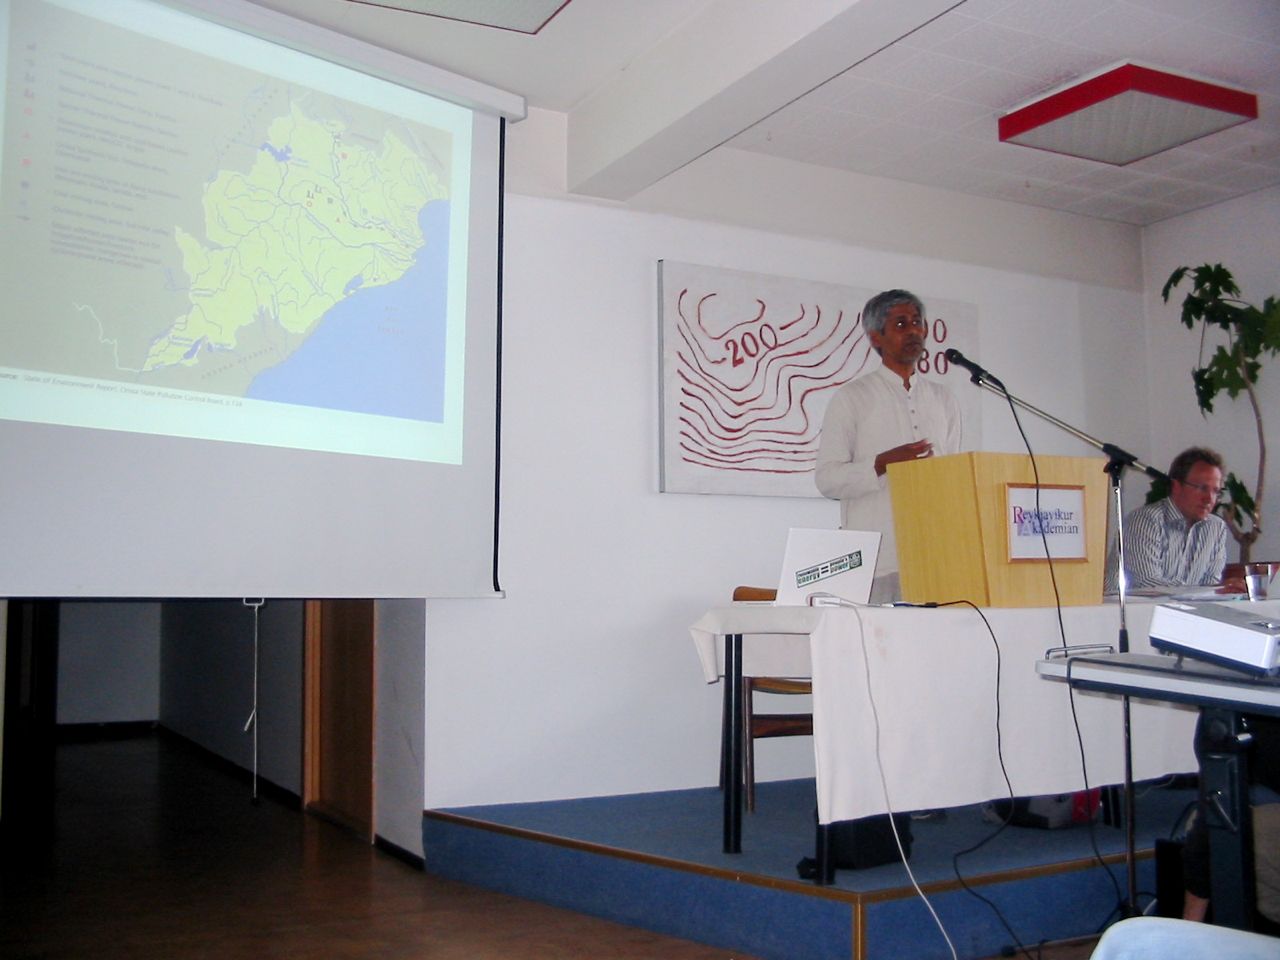 Samarendra is showing the link between forest destruction and bauxite mining